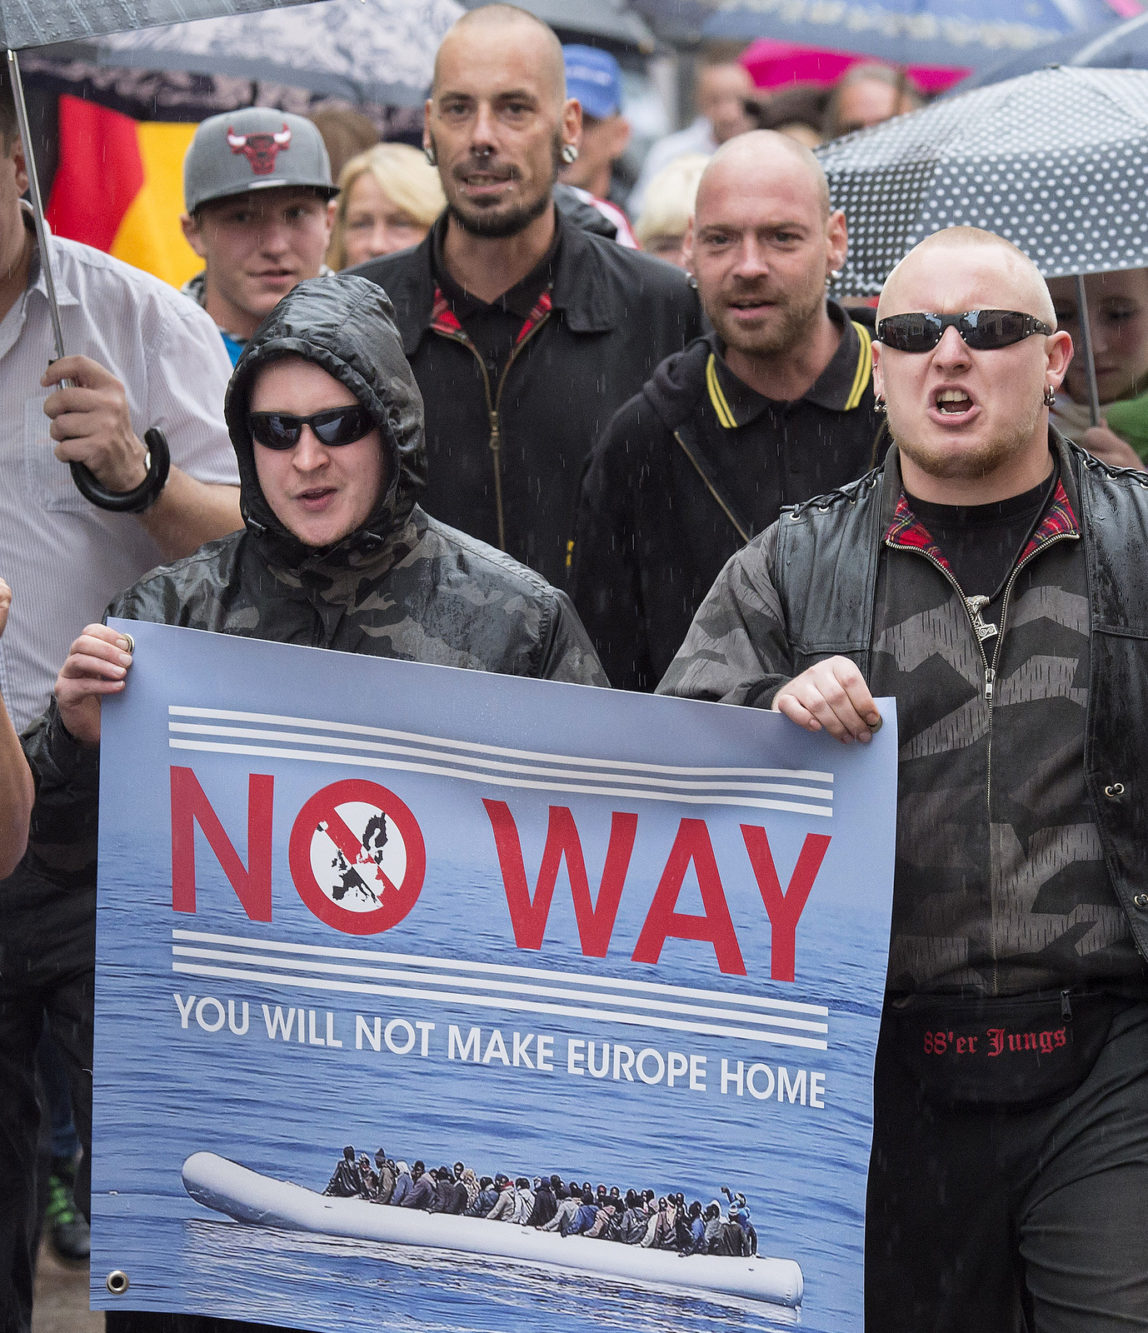 People take part at a demonstration initiated by right-wing NPD (National Democratic Party of Germany) against the German asylum law and asylum seekers in Riesa, eastern Germany, Tuesday, Aug. 18, 2015. (AP/Jens Meyer)